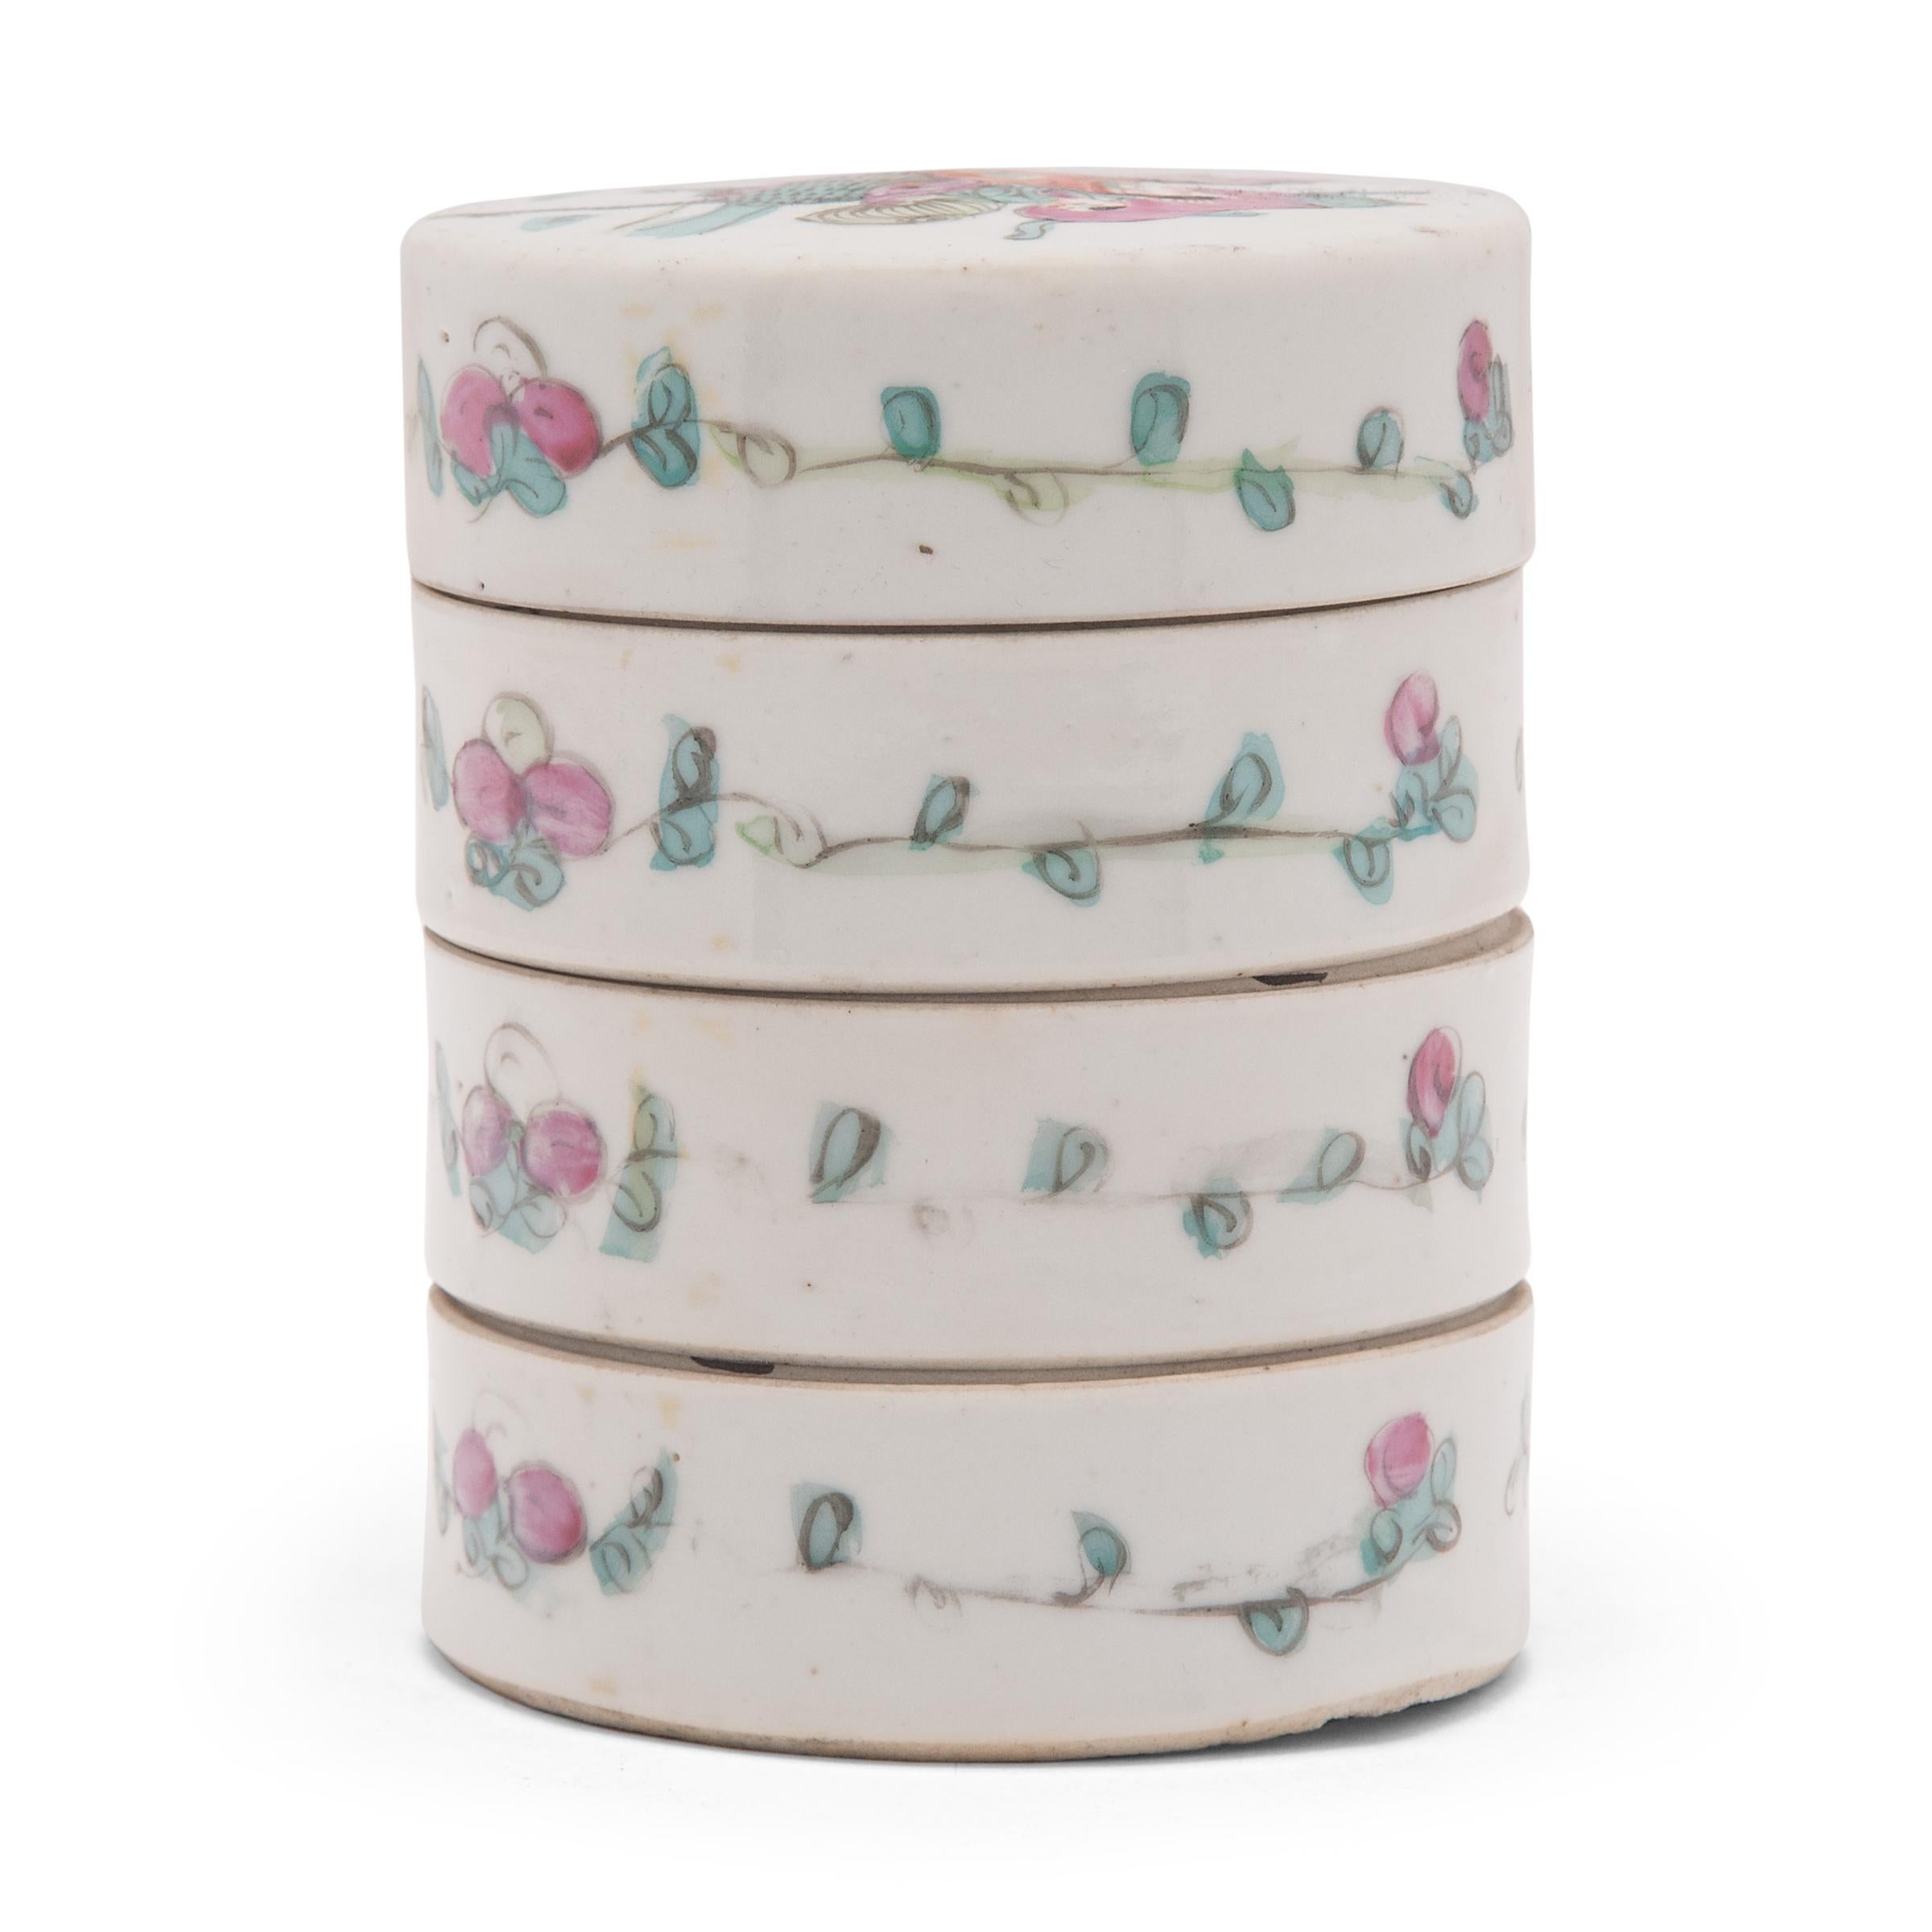 This early 20th-century porcelain stacking box would have been used in a woman's personal chambers to store jewelry, cosmetics, and precious small objects. The box has four tiers and is painted with overglaze enamels against white underglaze. The